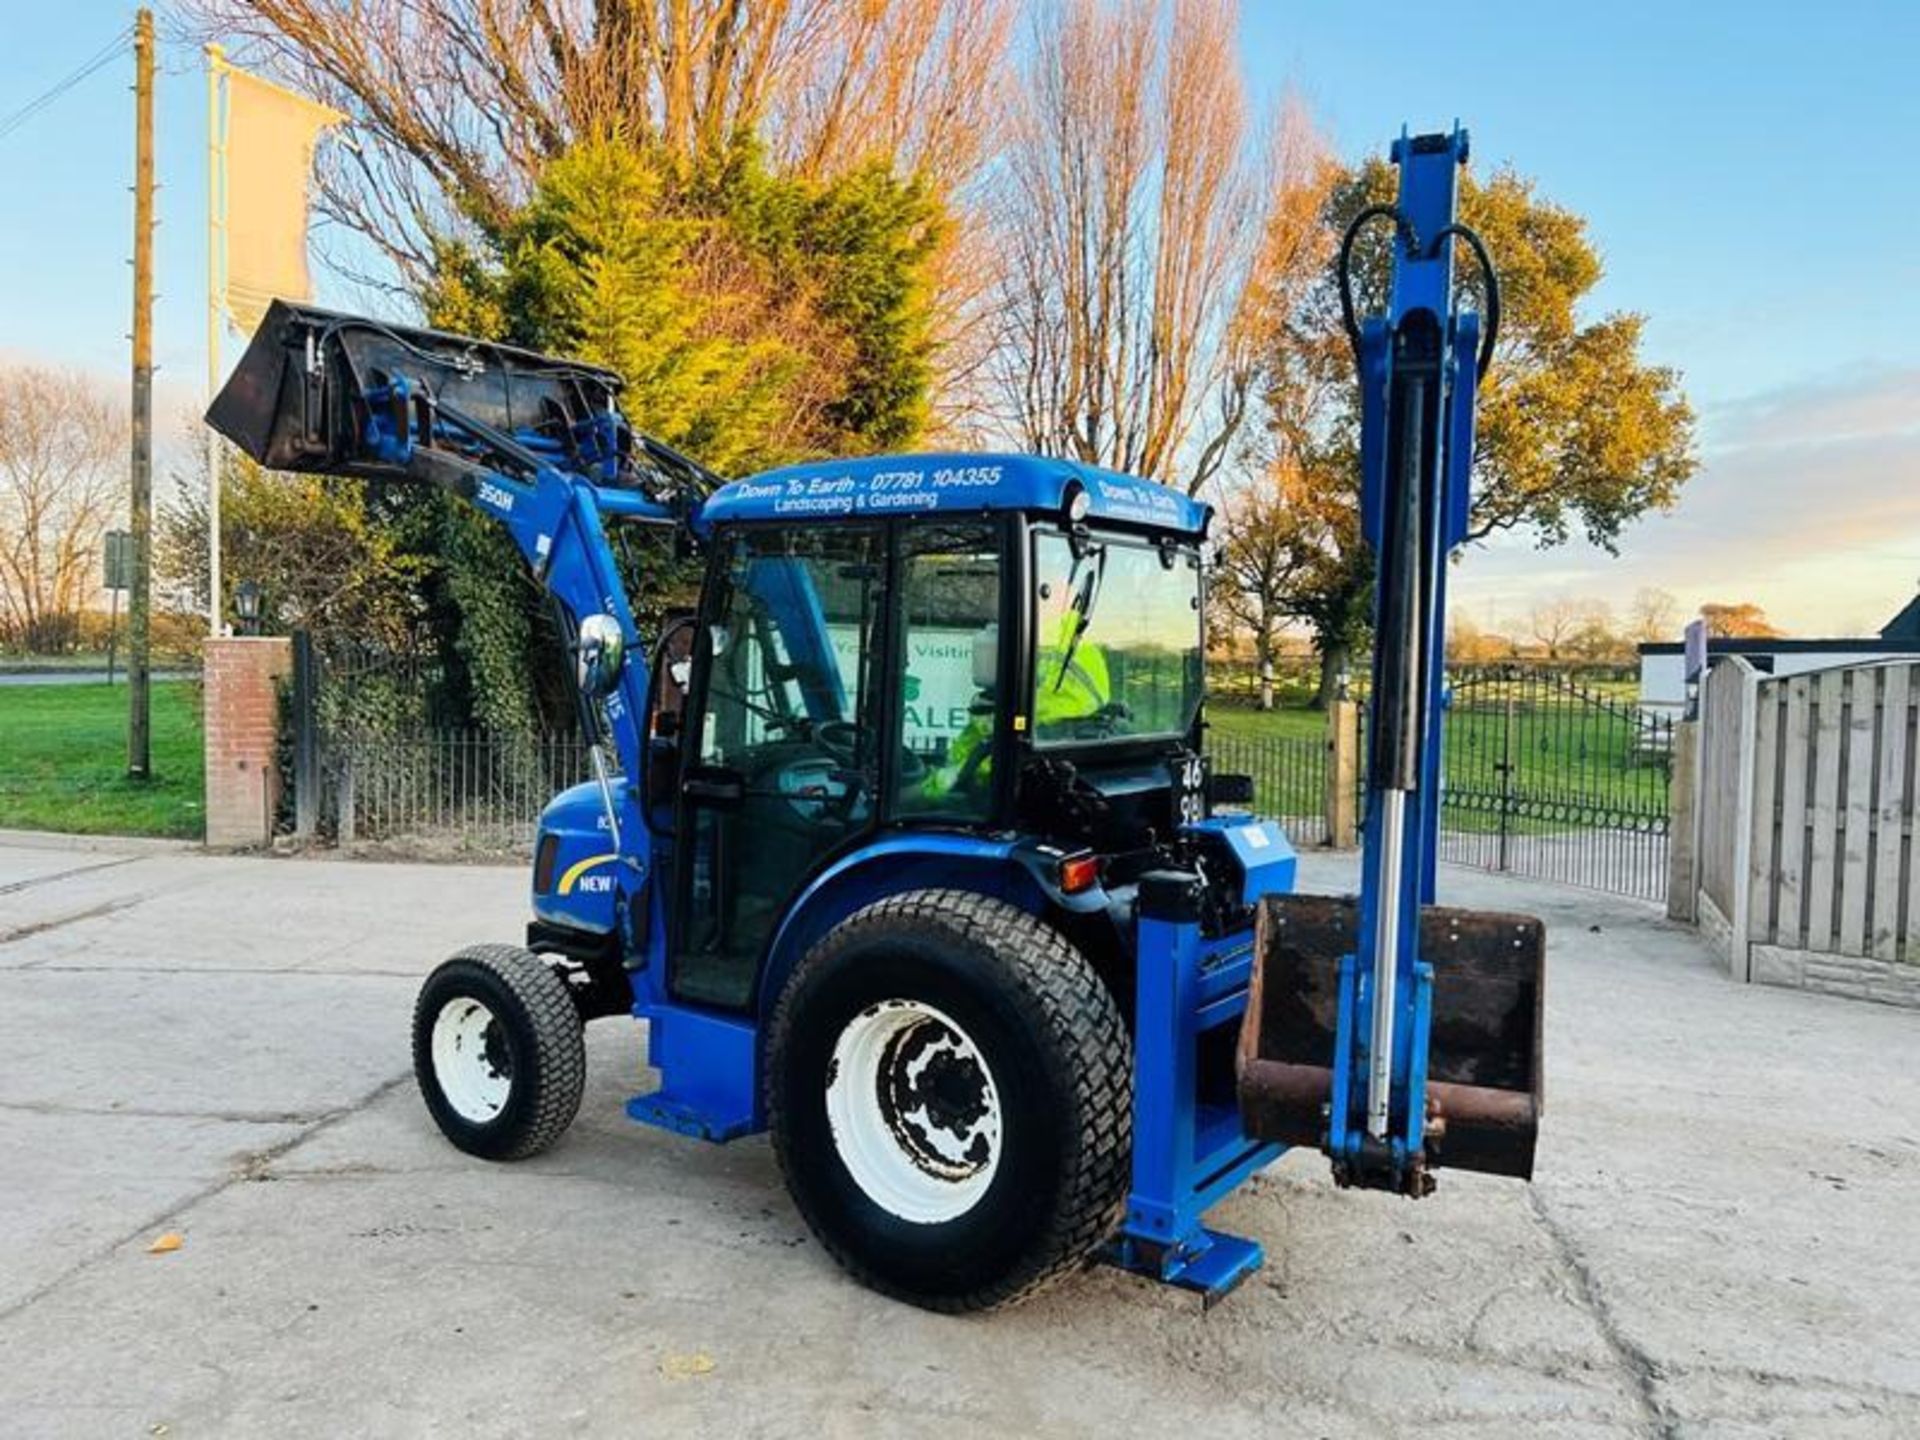 NEW HOLLAND BOOMER 40 4WD TRACTOR *YEAR 2014, ONLY 737 HRS* C/W LOADER & BACK TRACTOR - Image 3 of 19